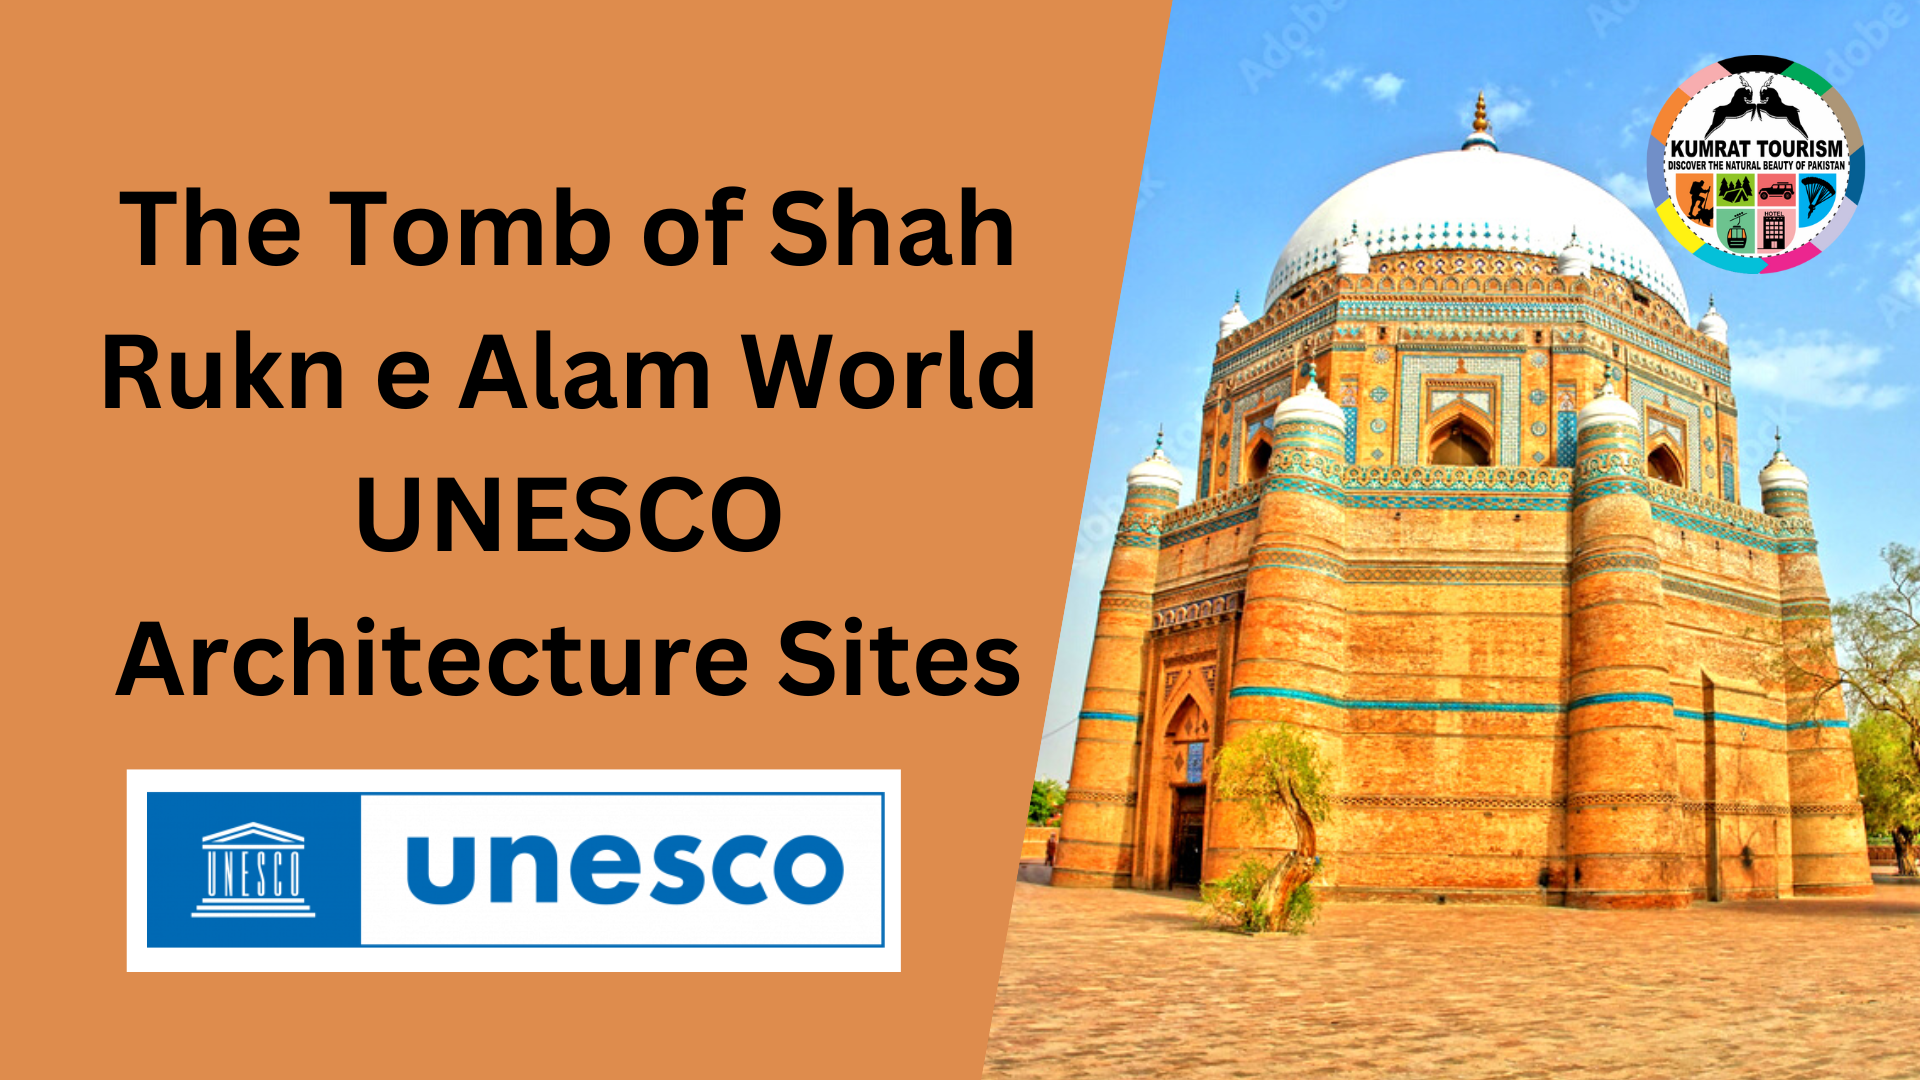 The Tomb of Shah Rukn e Alam World UNESCO Architecture Sites